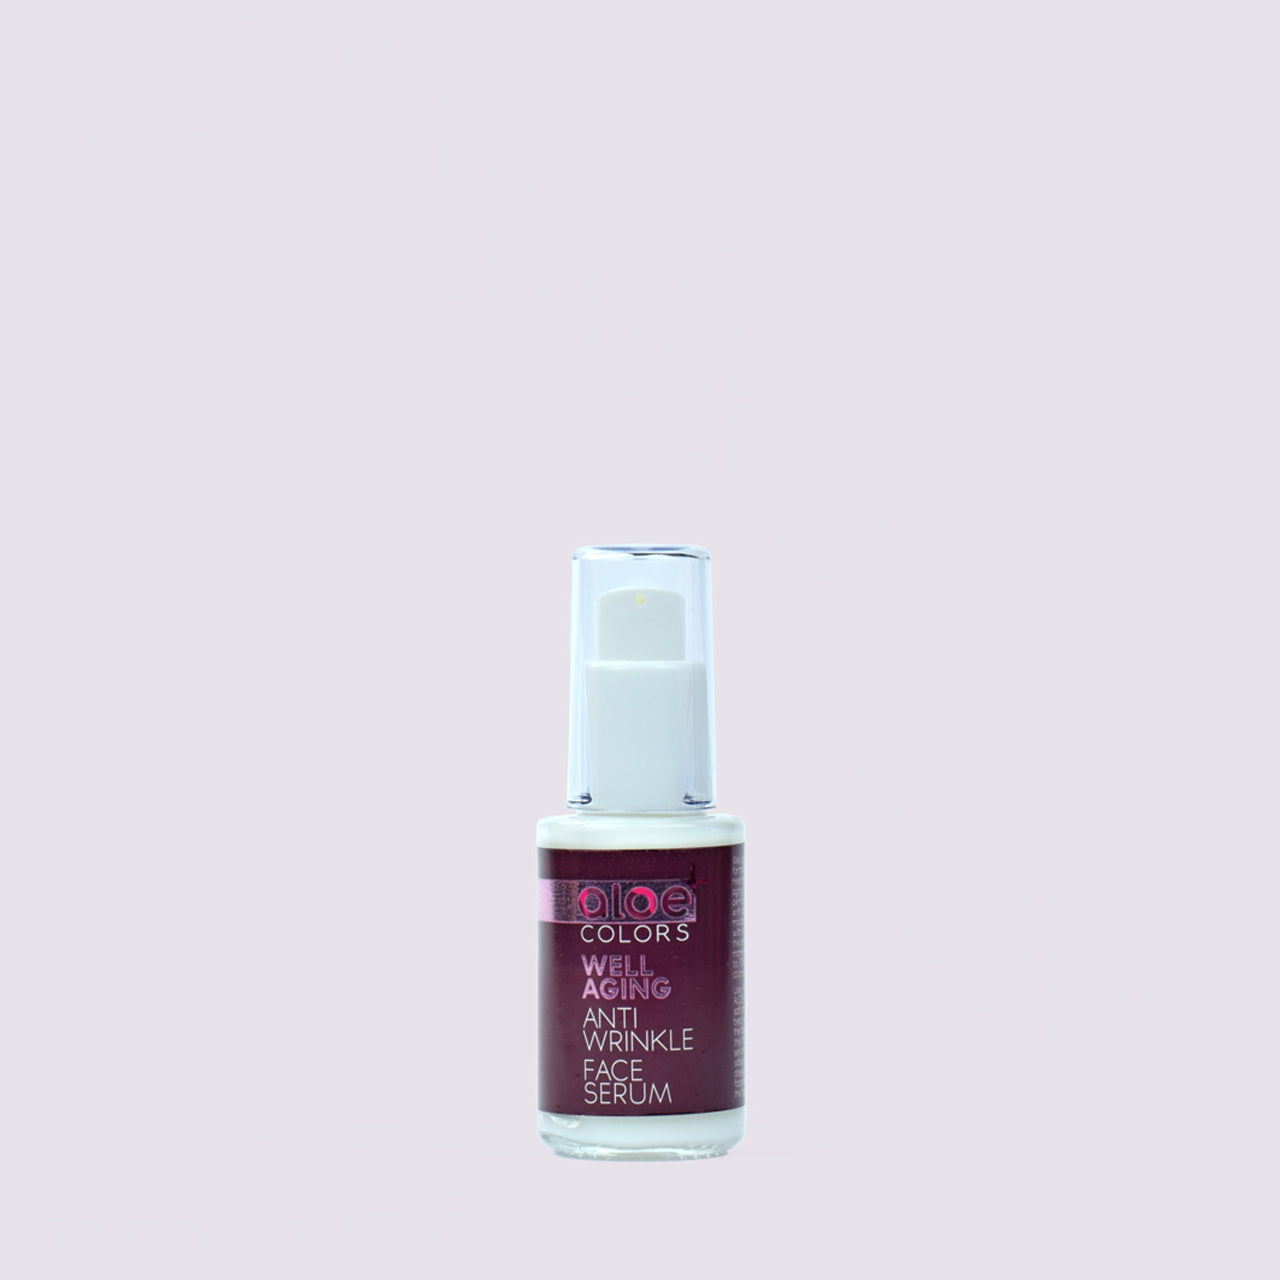 Well Aging Antiwrinkle Face Serum